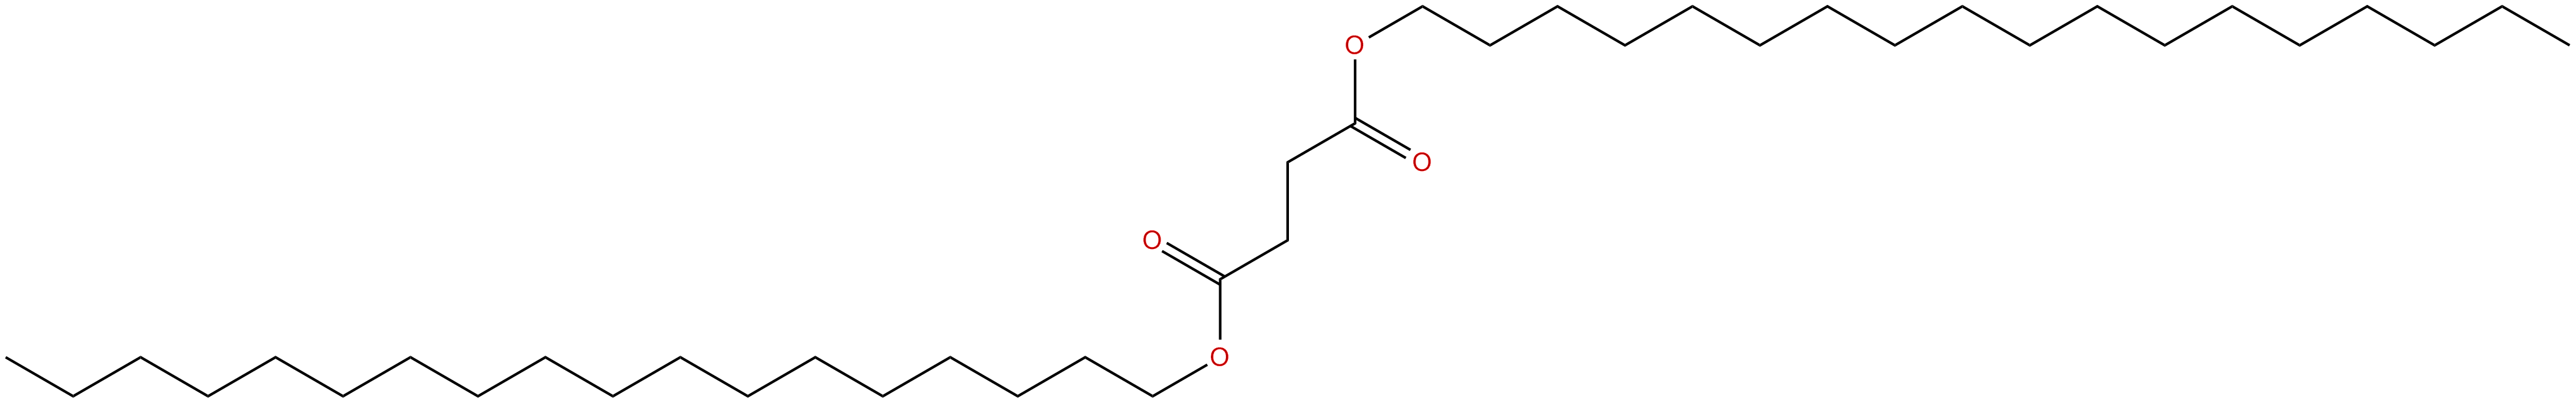 Image of dioctadecyl succinate